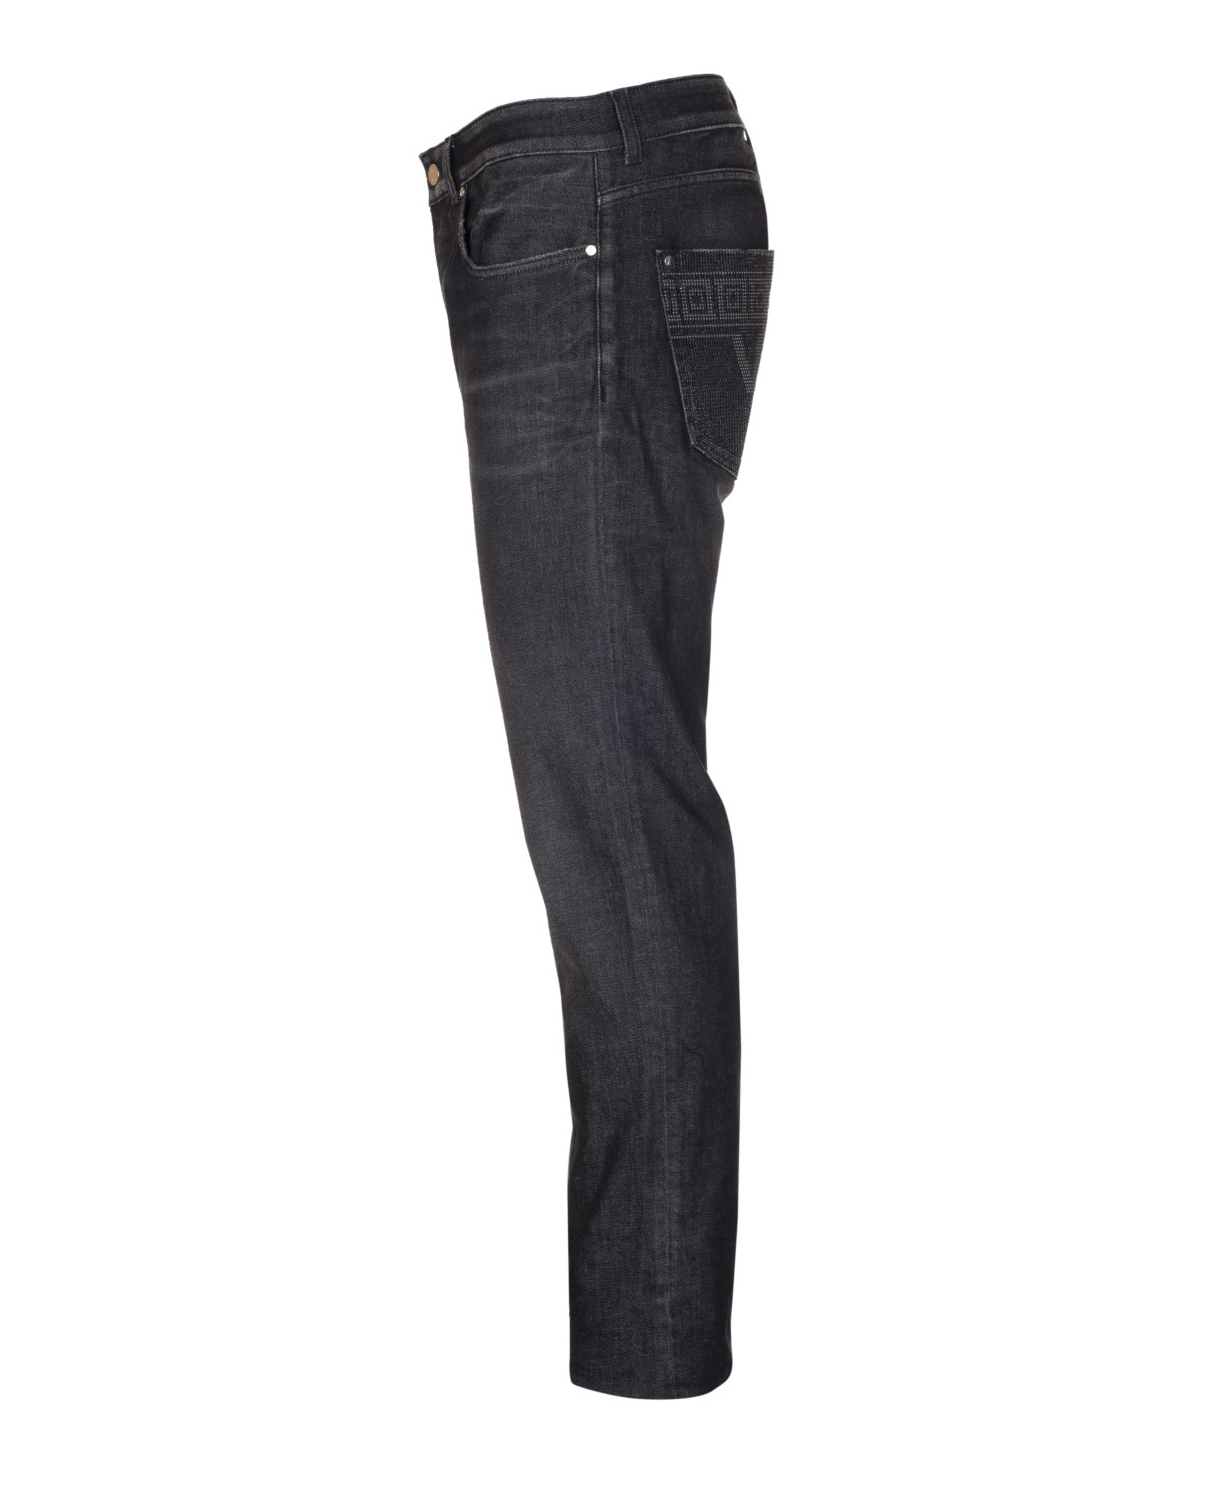 www.couturepoint.com-versace-collection-mens-black-stretch-cotton-embellished-new-fit-denim-jeans